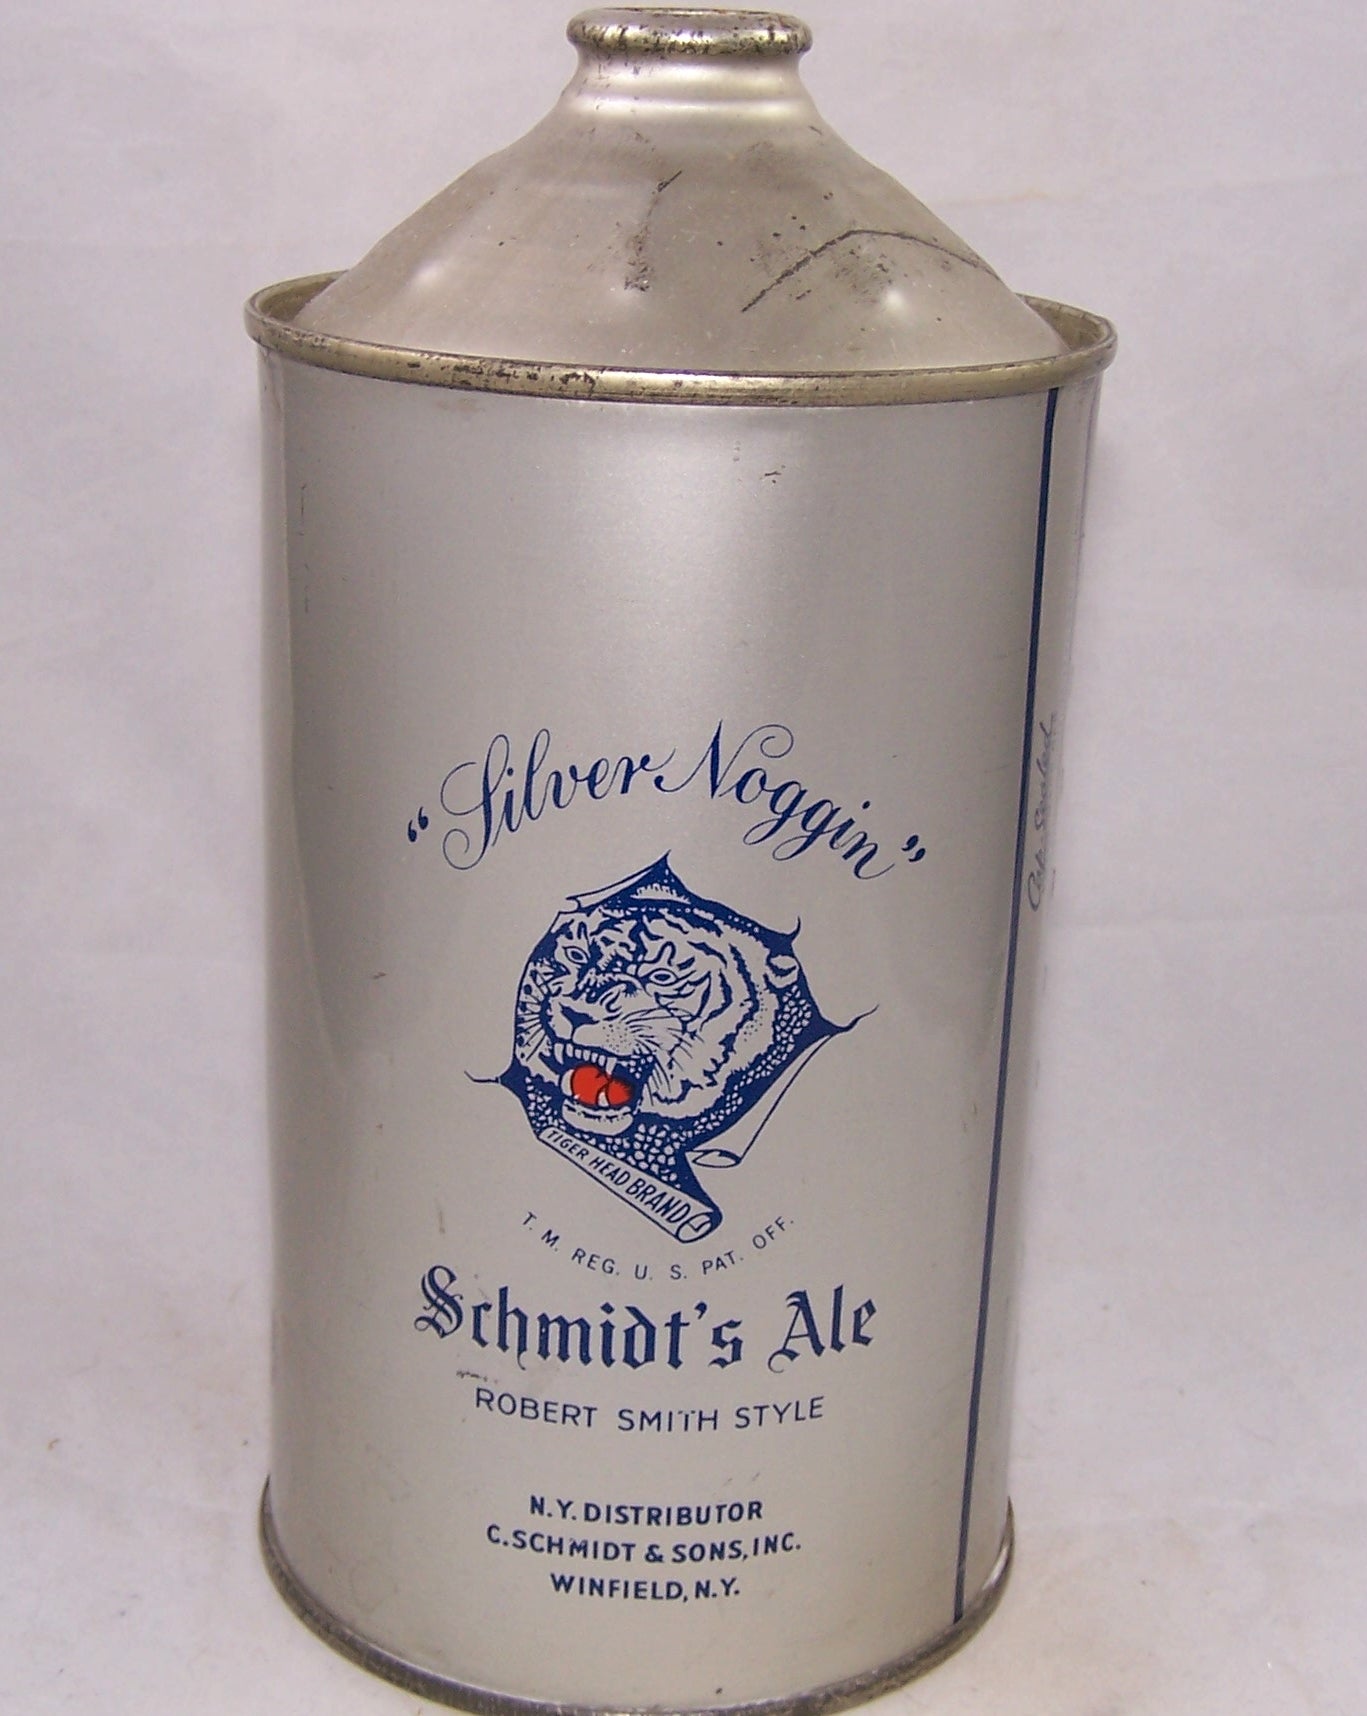 Schmidt's Tiger Brand Cream Ale, USBC 218-18, Grade 1/1+ to A1+ Sold on 12/01/17